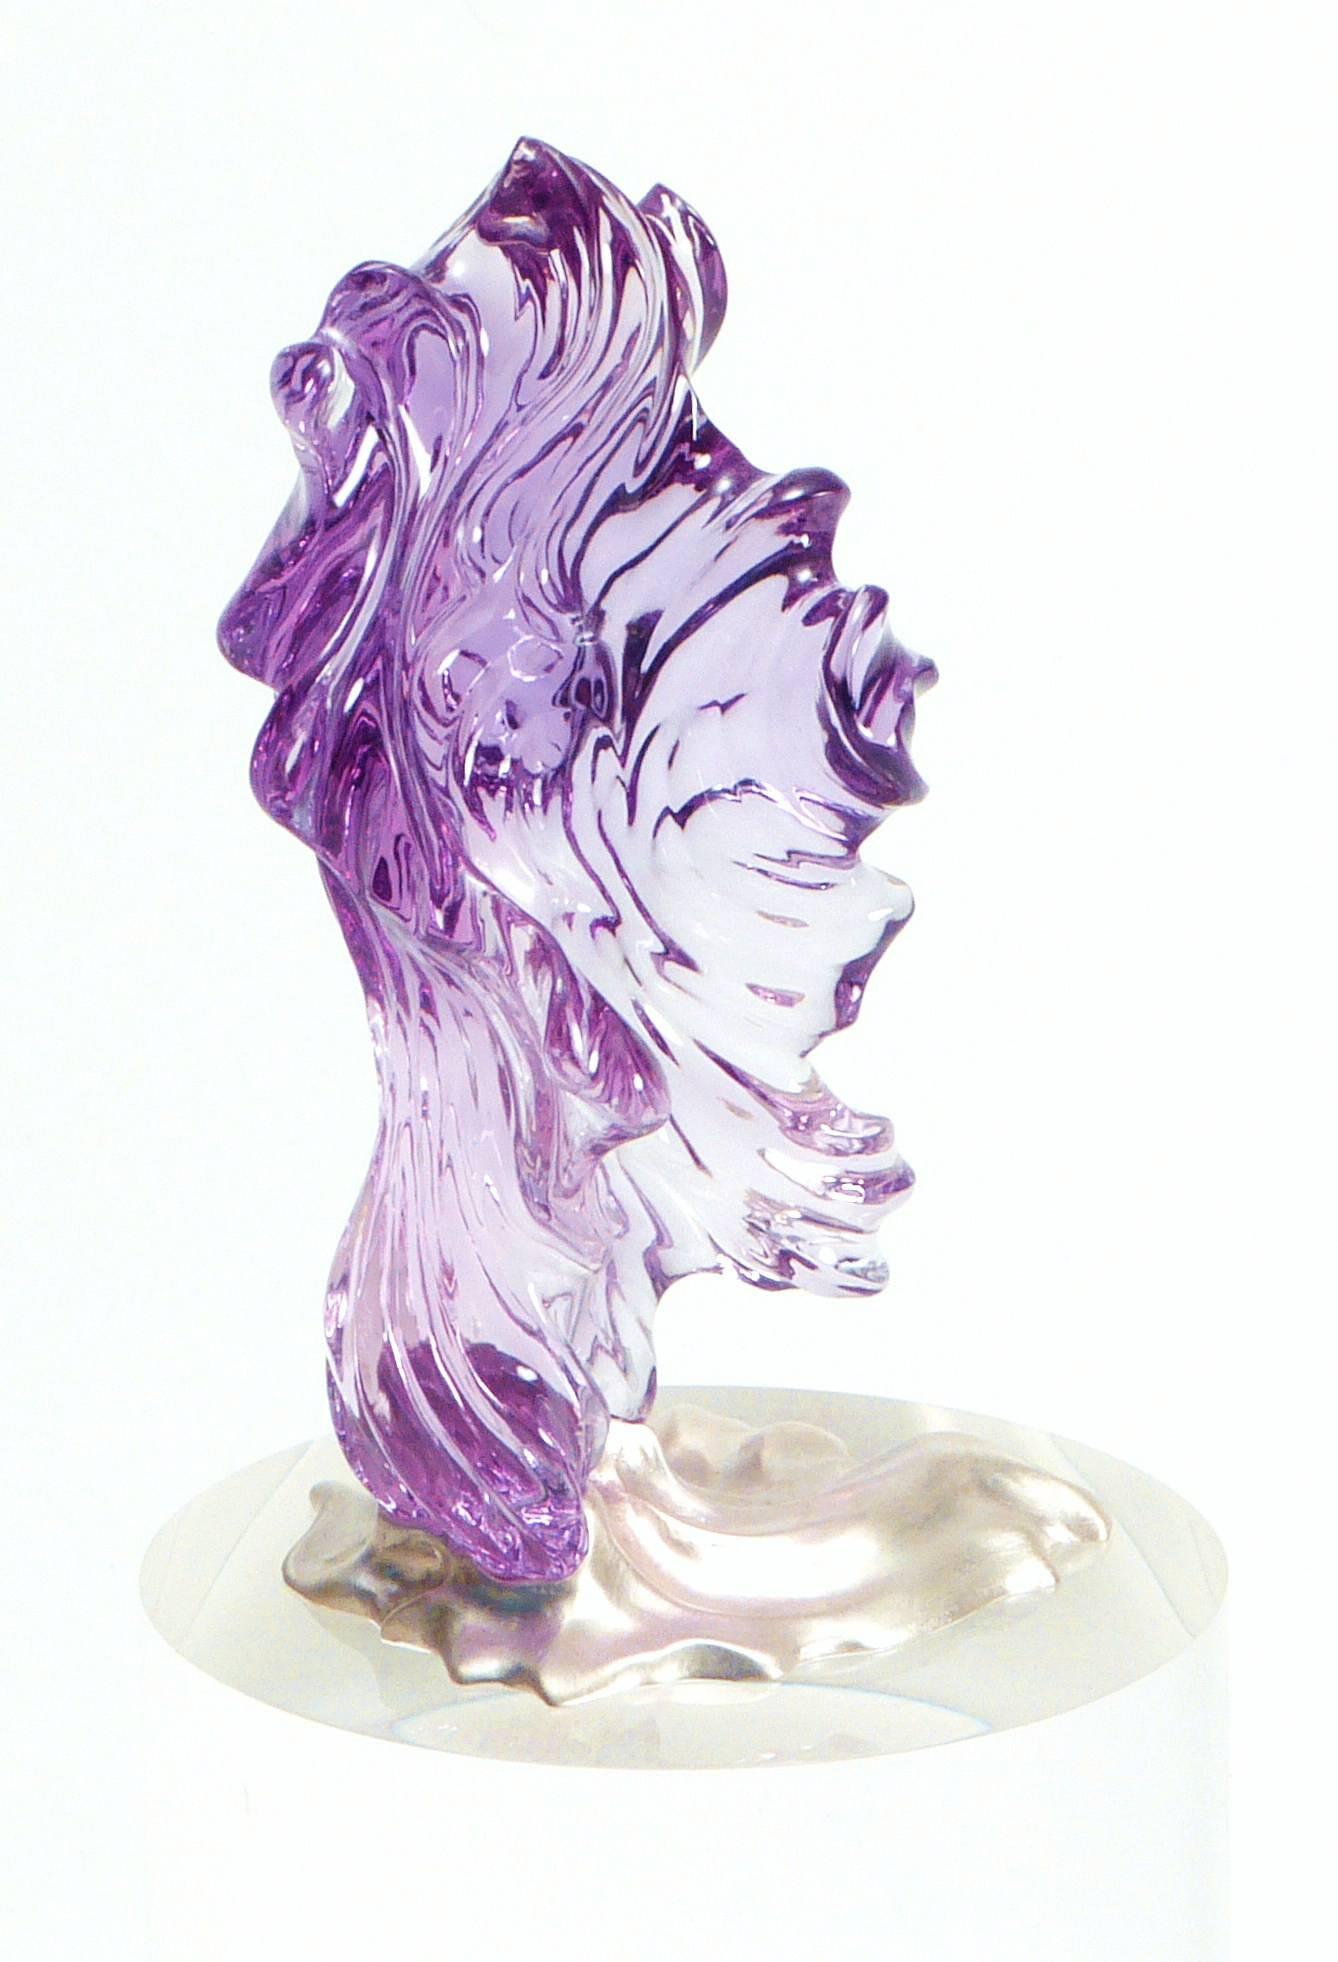 AGTA award-winning hand carved 424 ct amethyst on a sterling silver base.

Internationally award winning designer Naomi Sarna creates gem carvings and jewels of unusual beauty. She is represented in the Smithsonian's Permanent Collection of